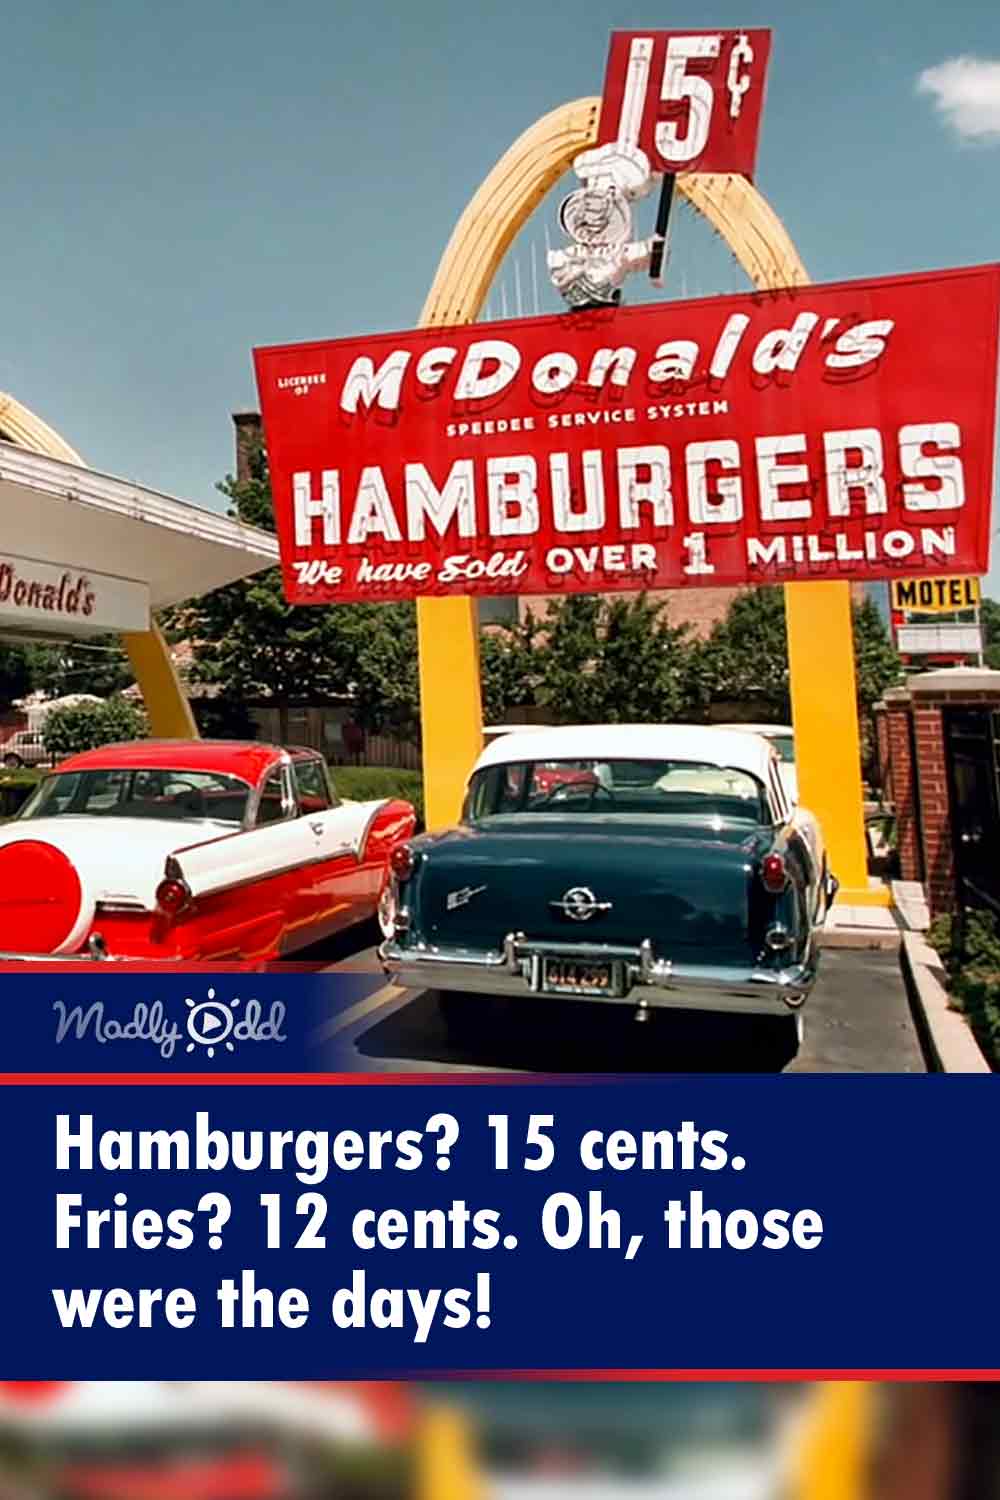 Hamburgers? 15 cents. Fries? 12 cents. Oh, those were the days!